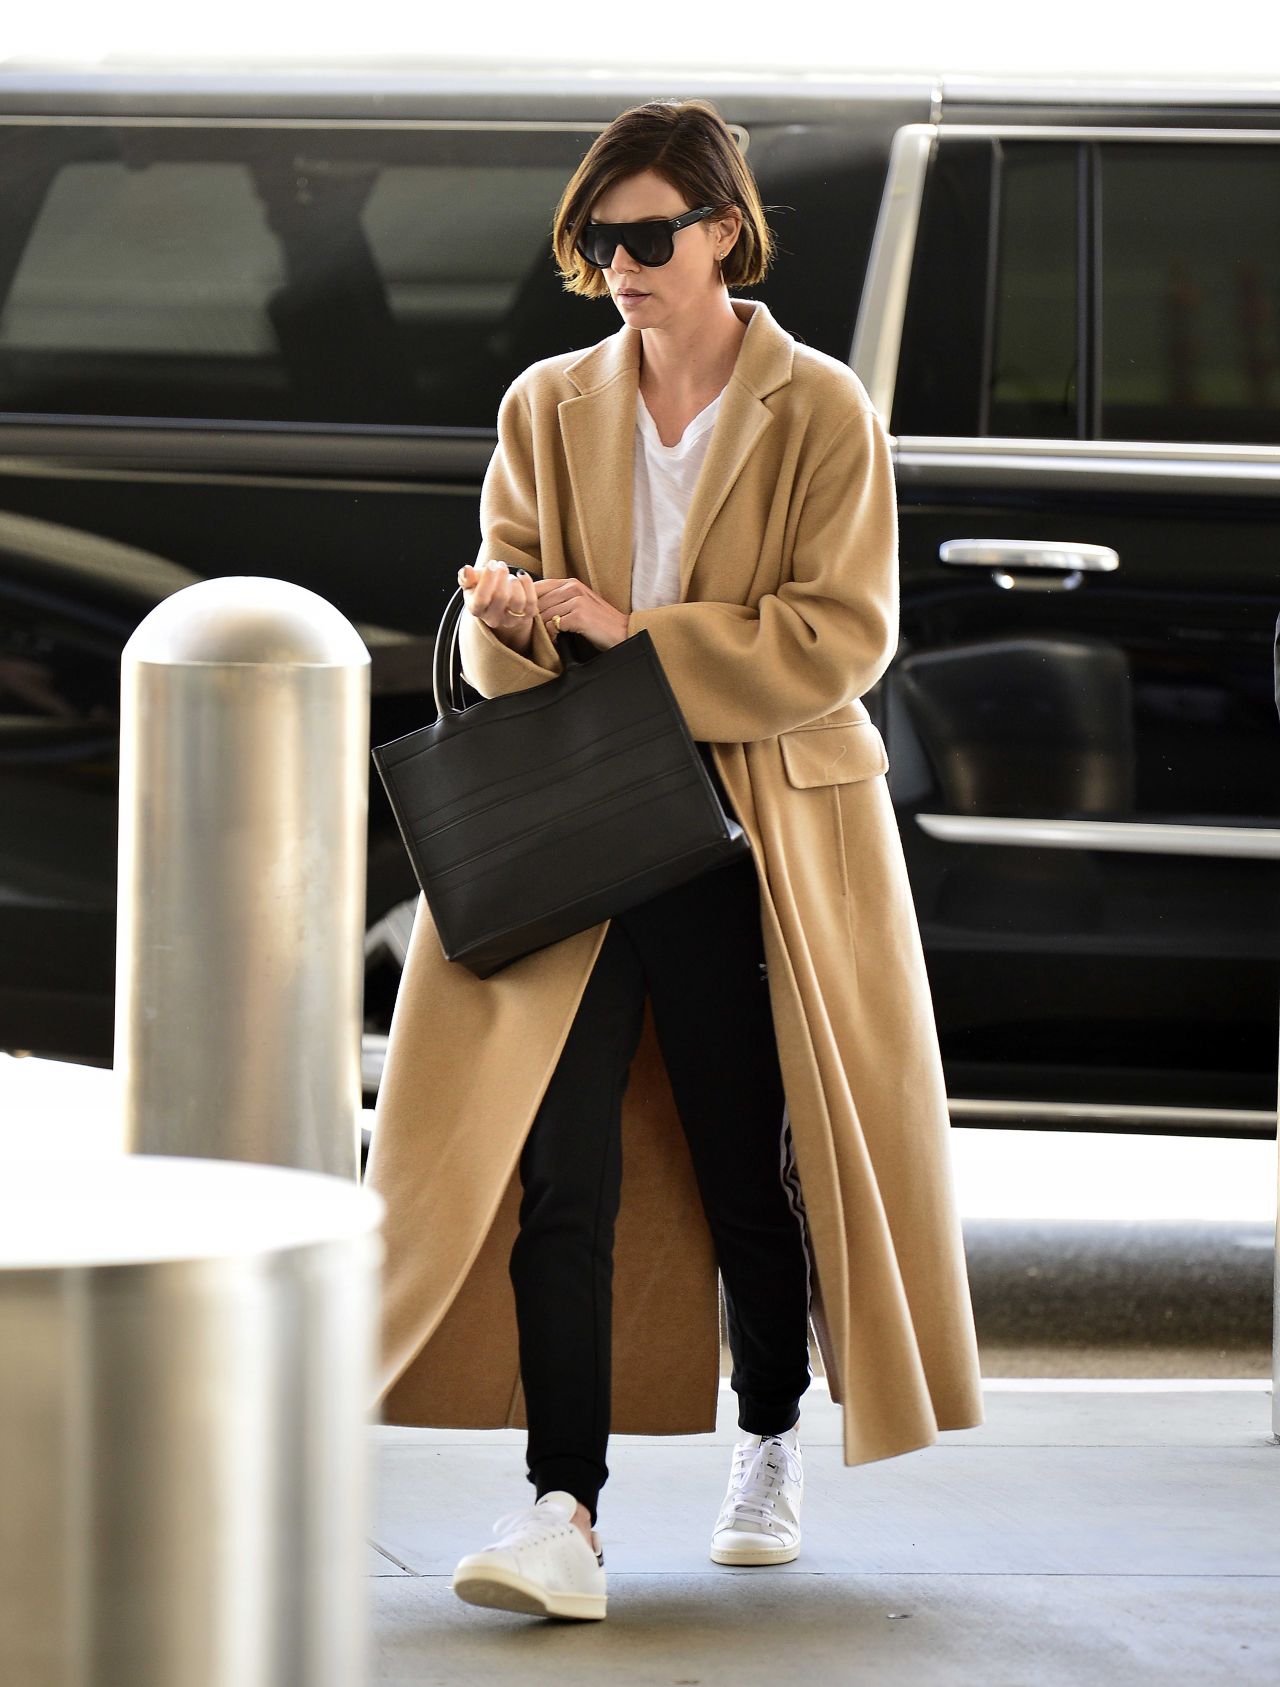 Charlize Theron at LAX August 12, 2016 – Star Style